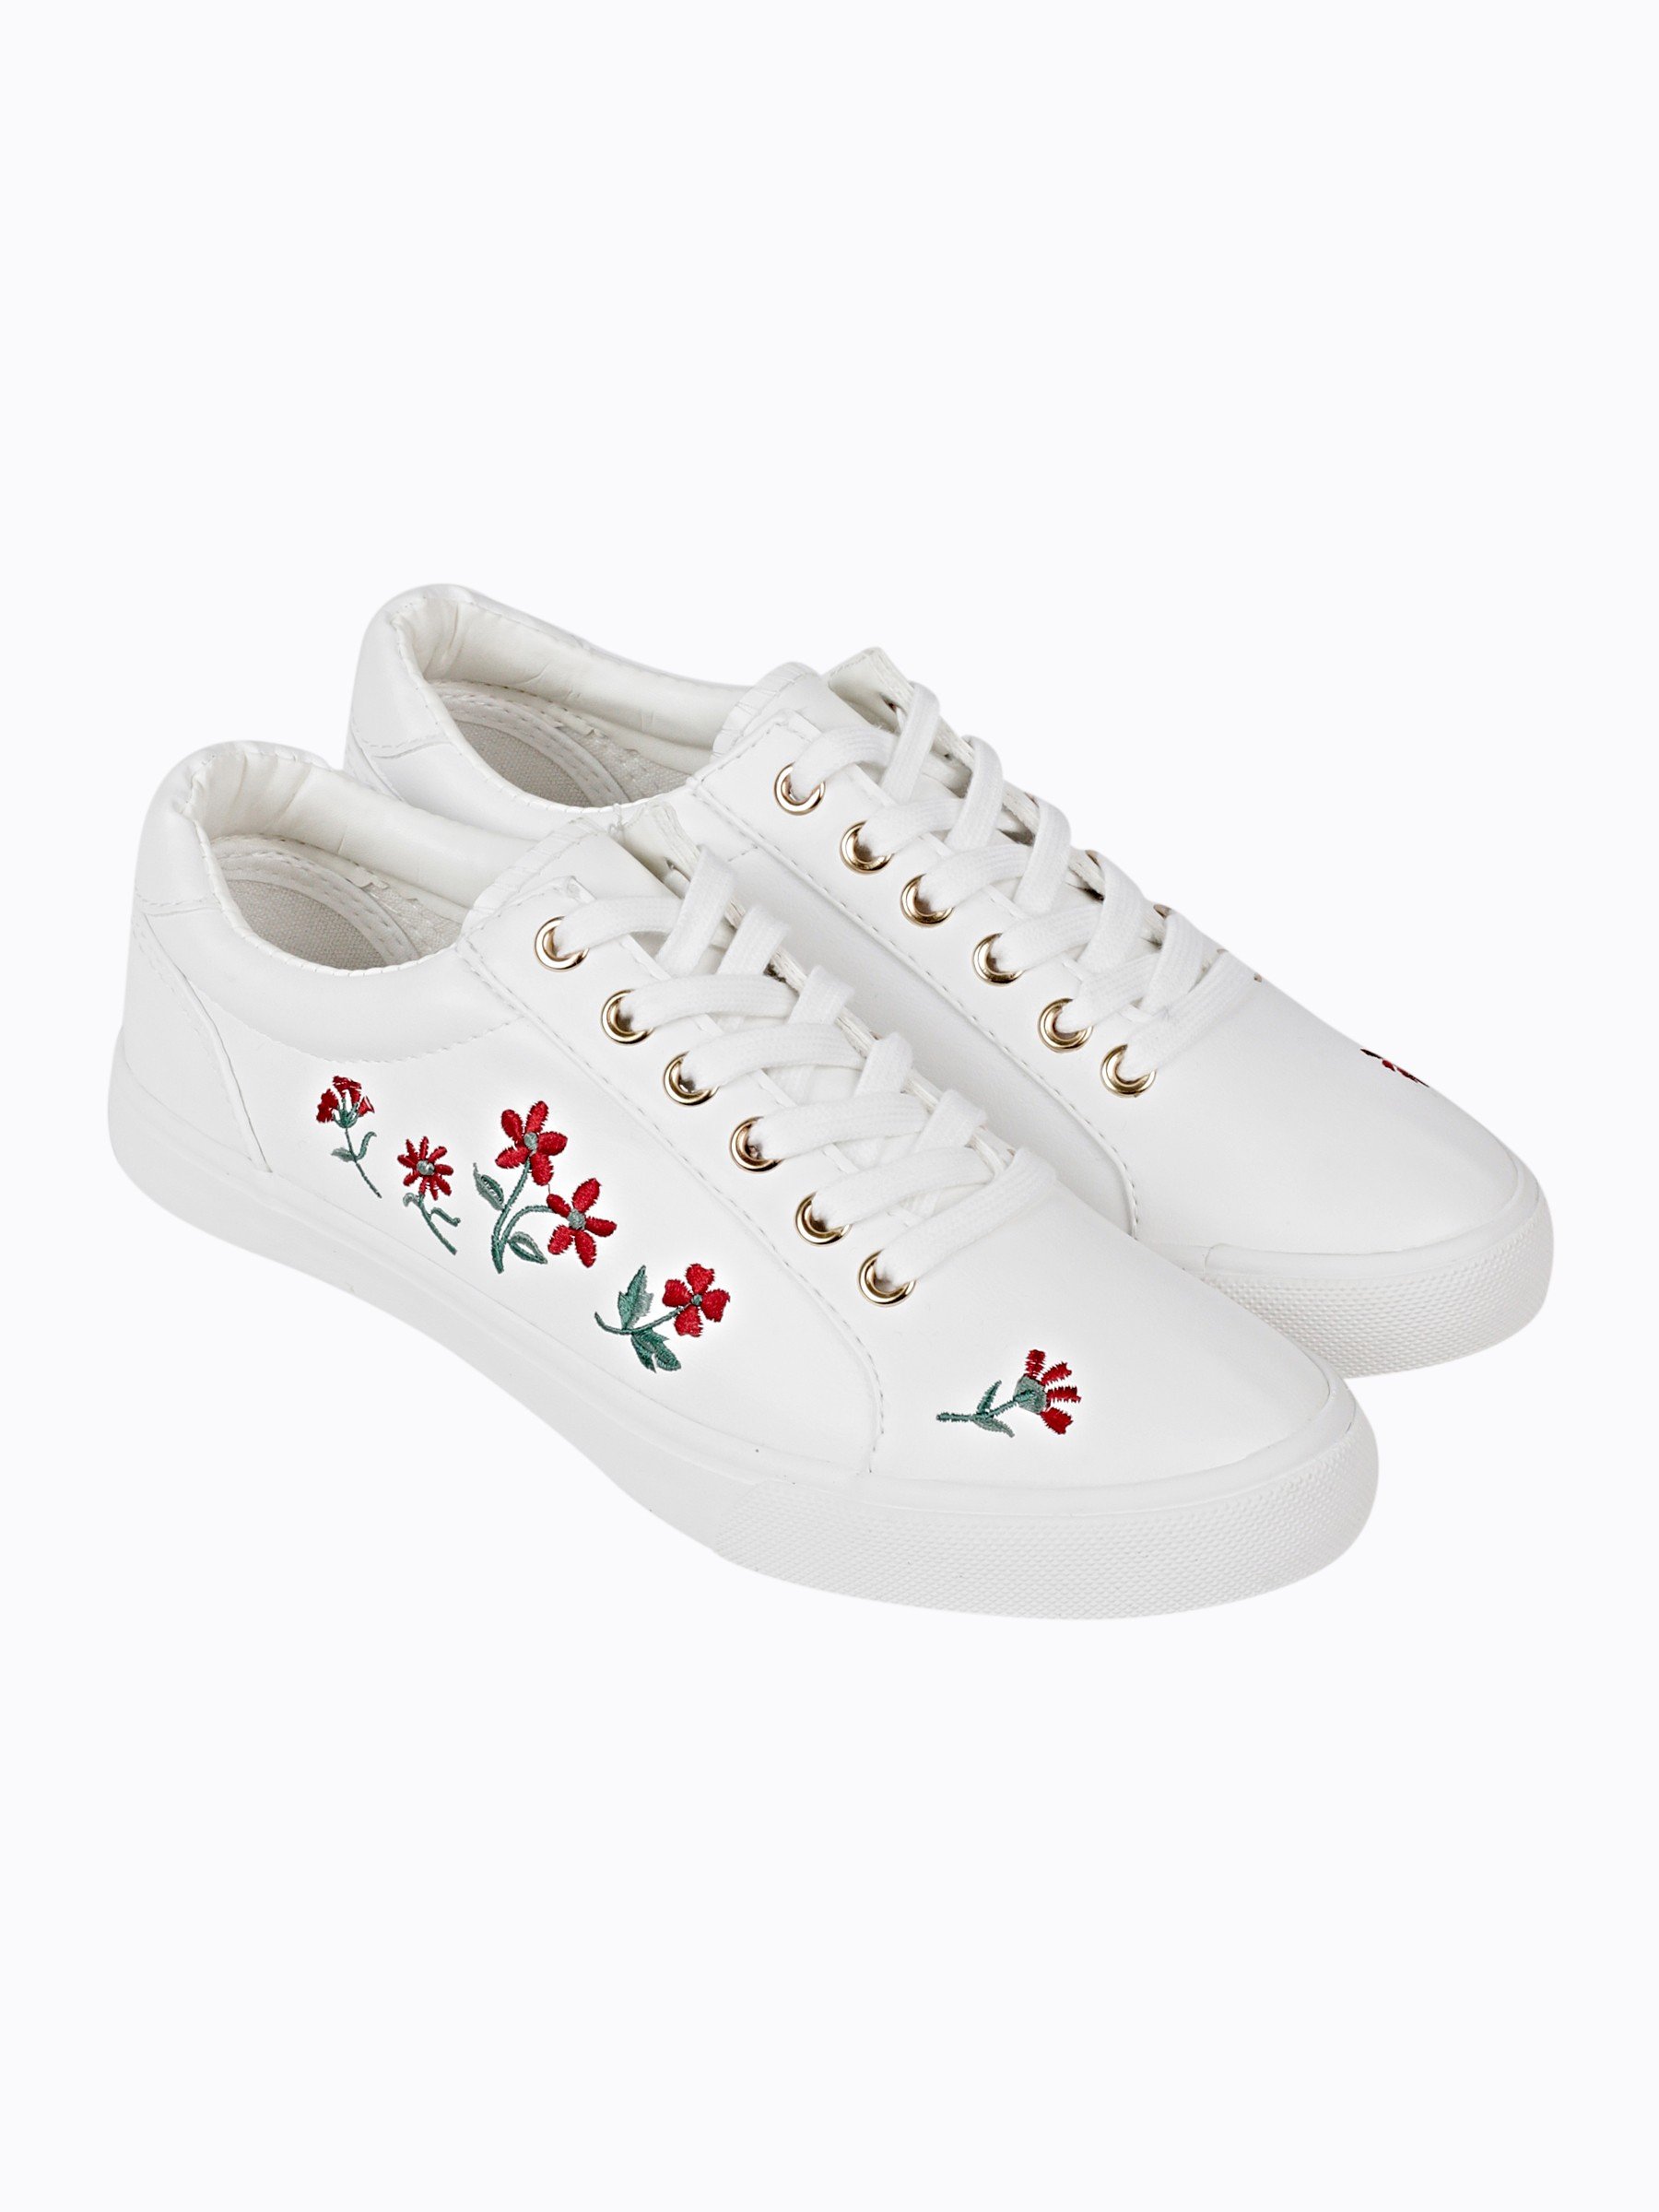 Floral embroidered sneakers | GATE